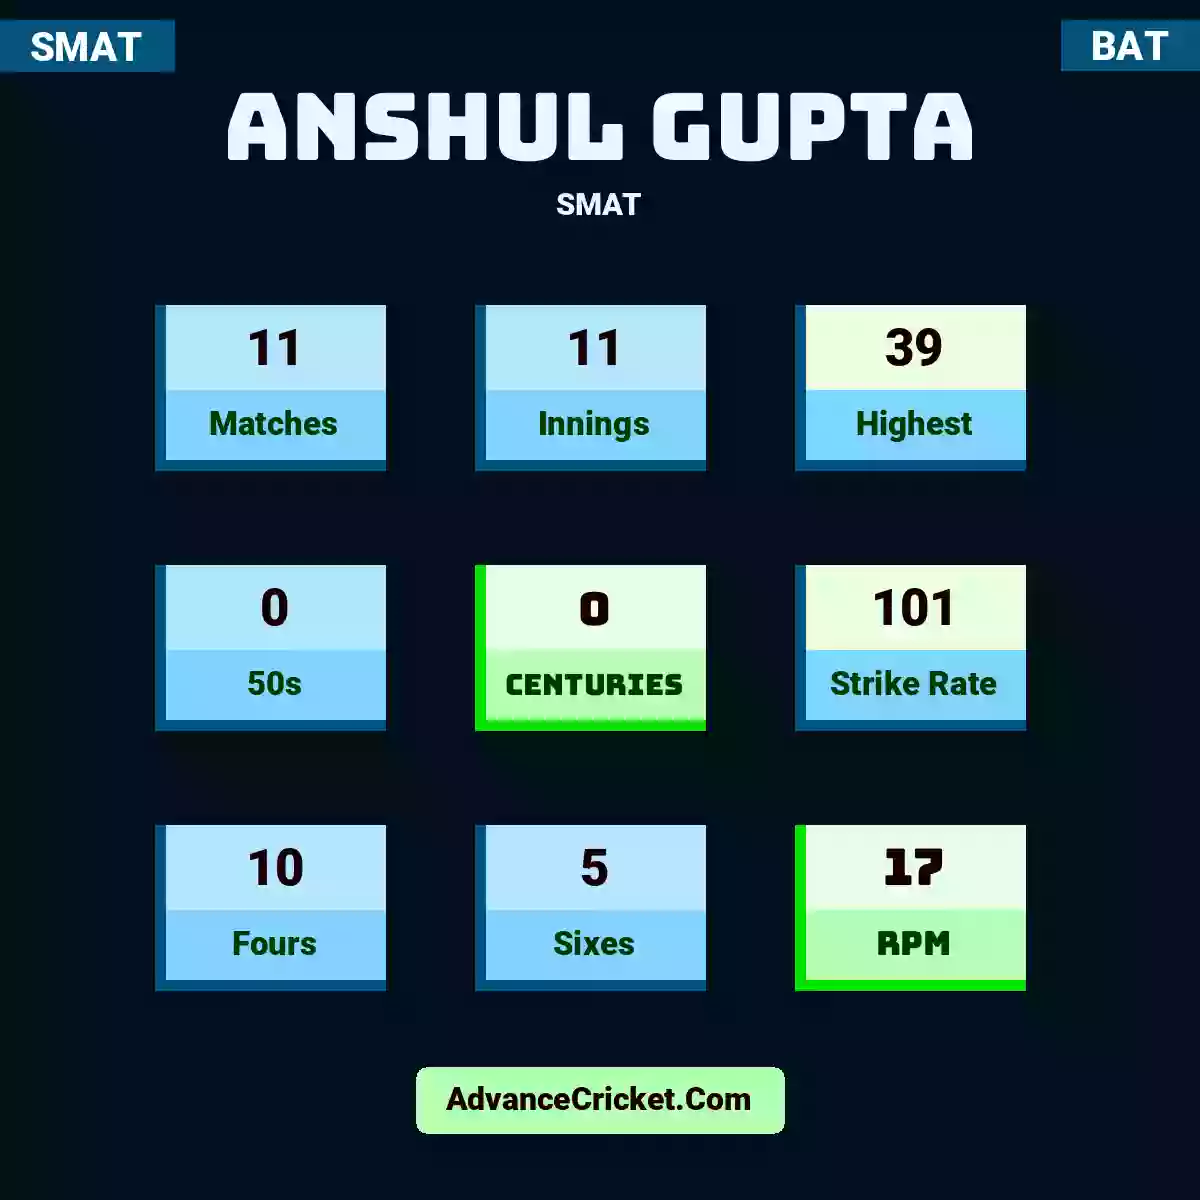 Anshul Gupta SMAT , Anshul Gupta played 11 matches, scored 39 runs as highest, 0 half-centuries, and 0 centuries, with a strike rate of 101. A.Gupta hit 10 fours and 5 sixes, with an RPM of 17.